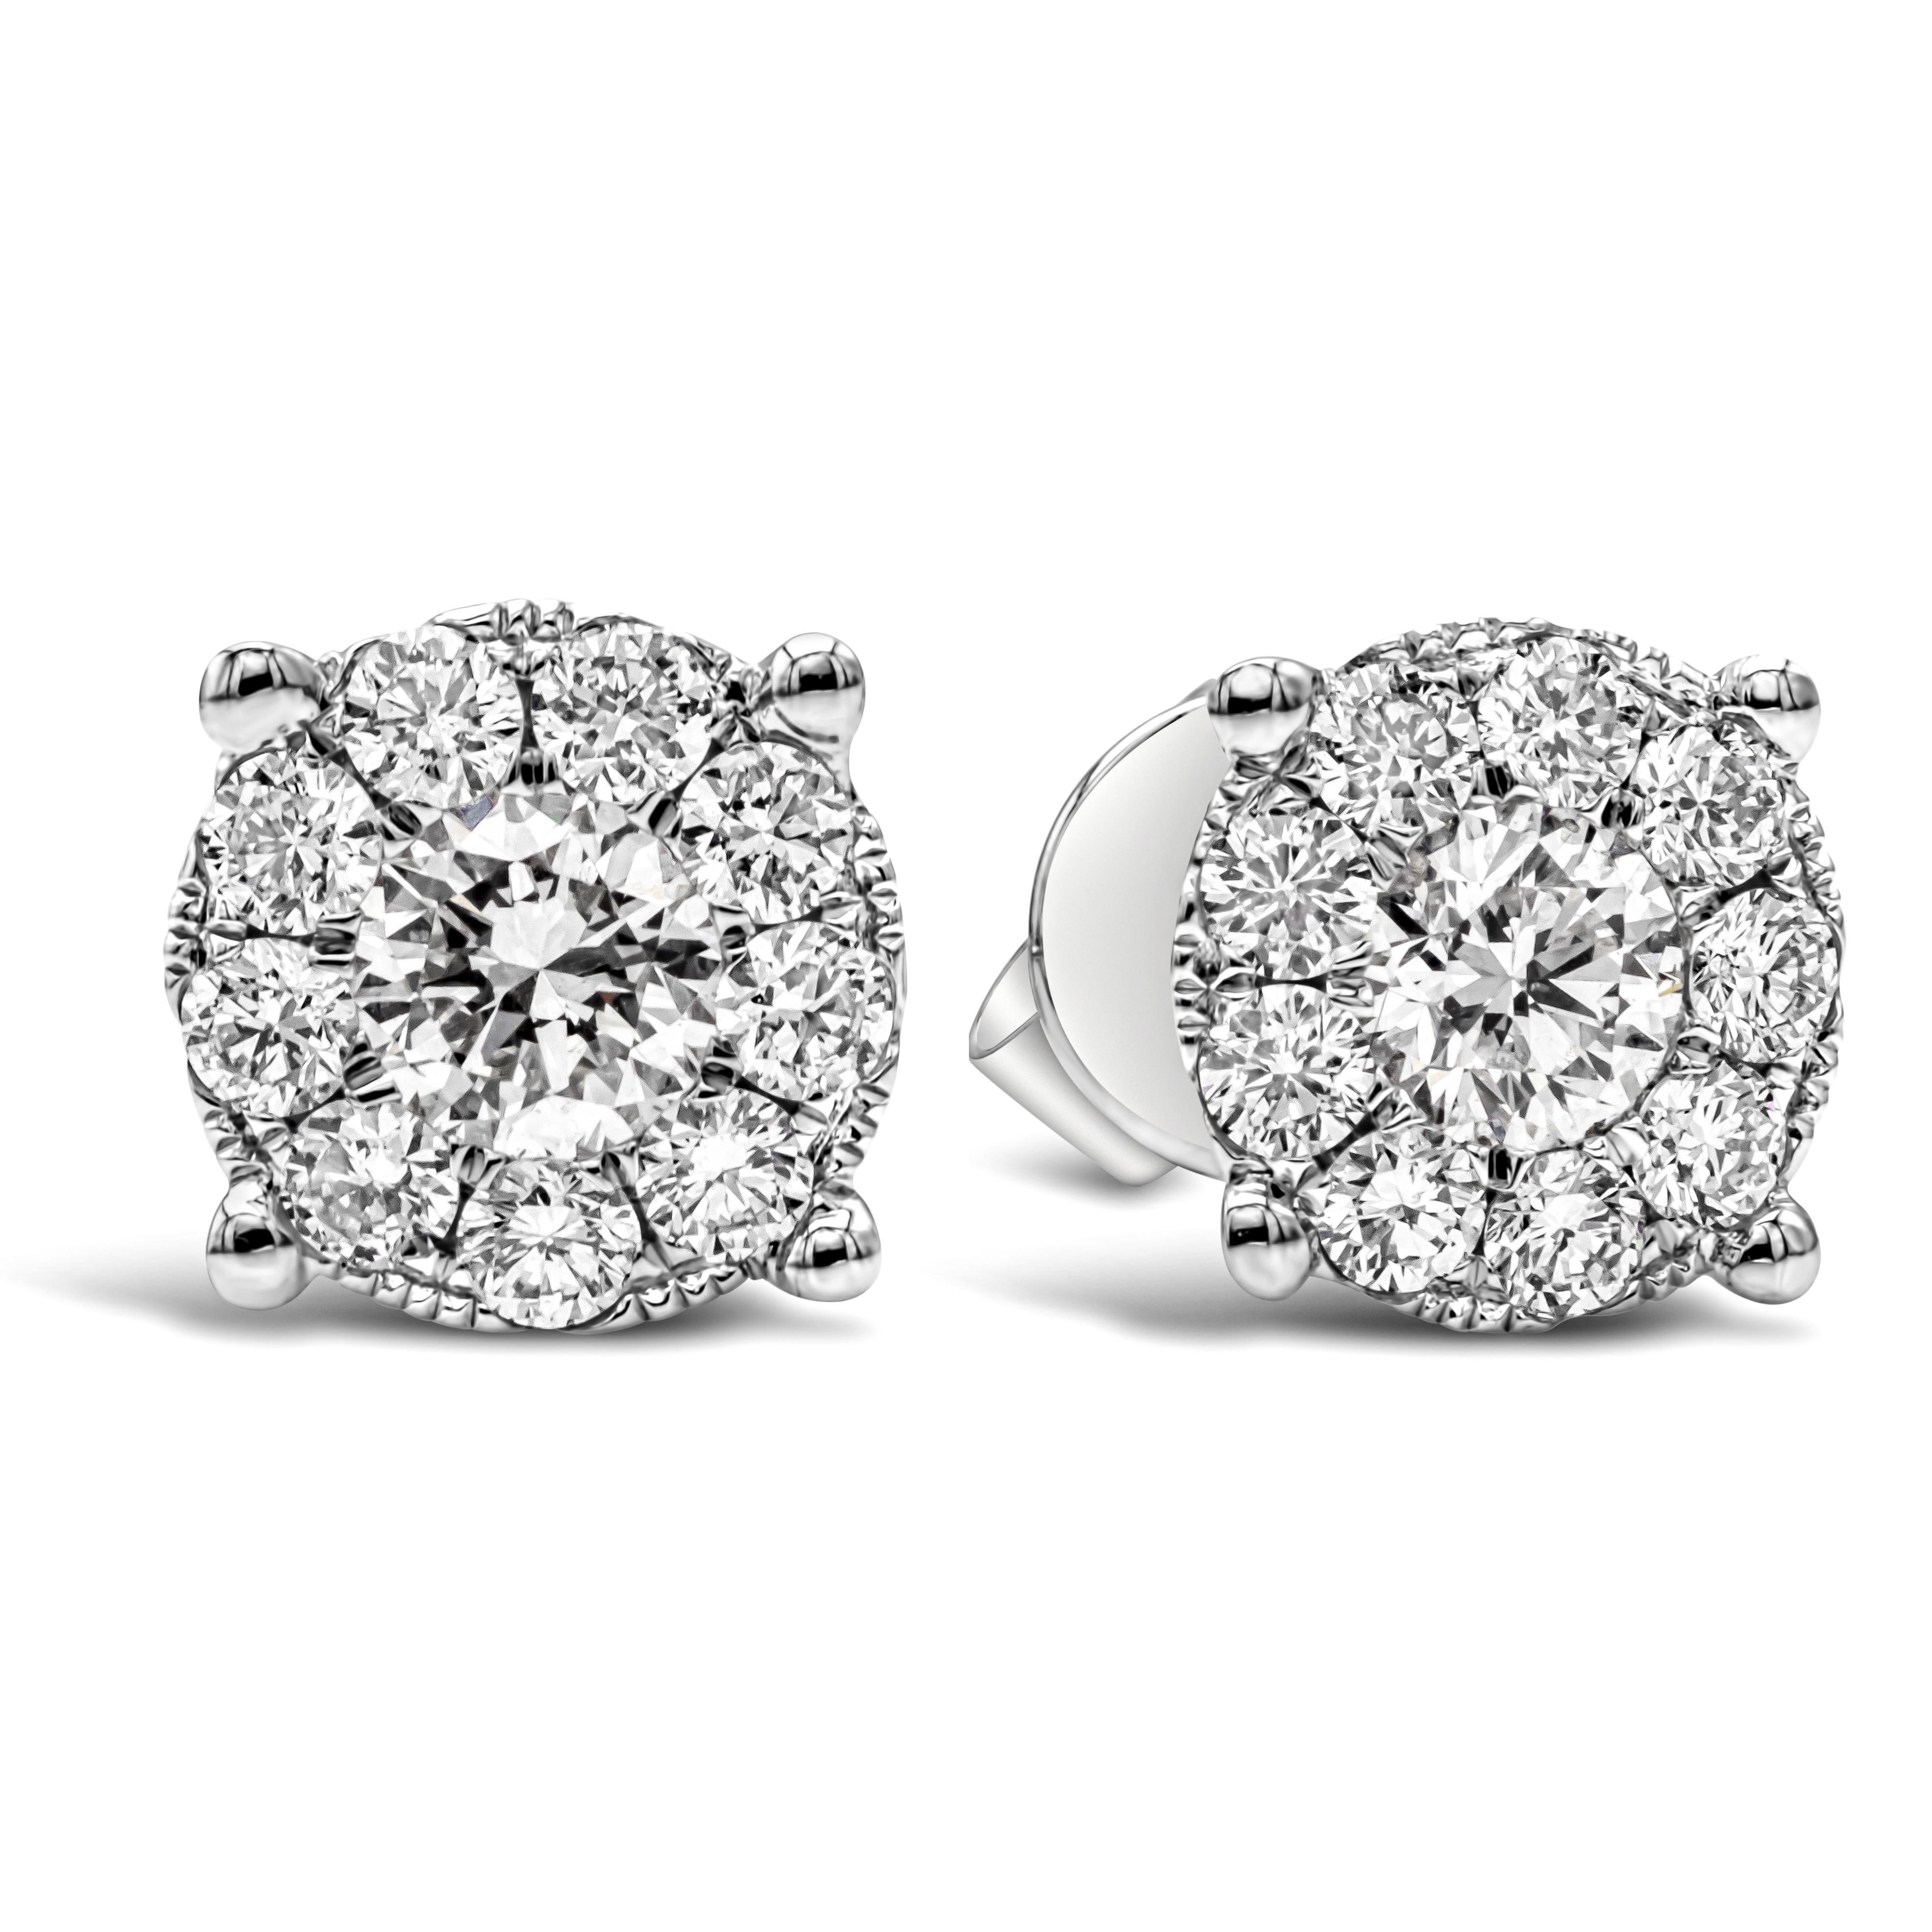 A classic pair of stud earrings showcasing a cluster of 20 round brilliant diamonds set in an 18k white gold. Diamonds weigh 0.74 carats total and are approximately F-G color, VS-SI in clarity. 7mm in diameter, Faces up like a 1.25 carats